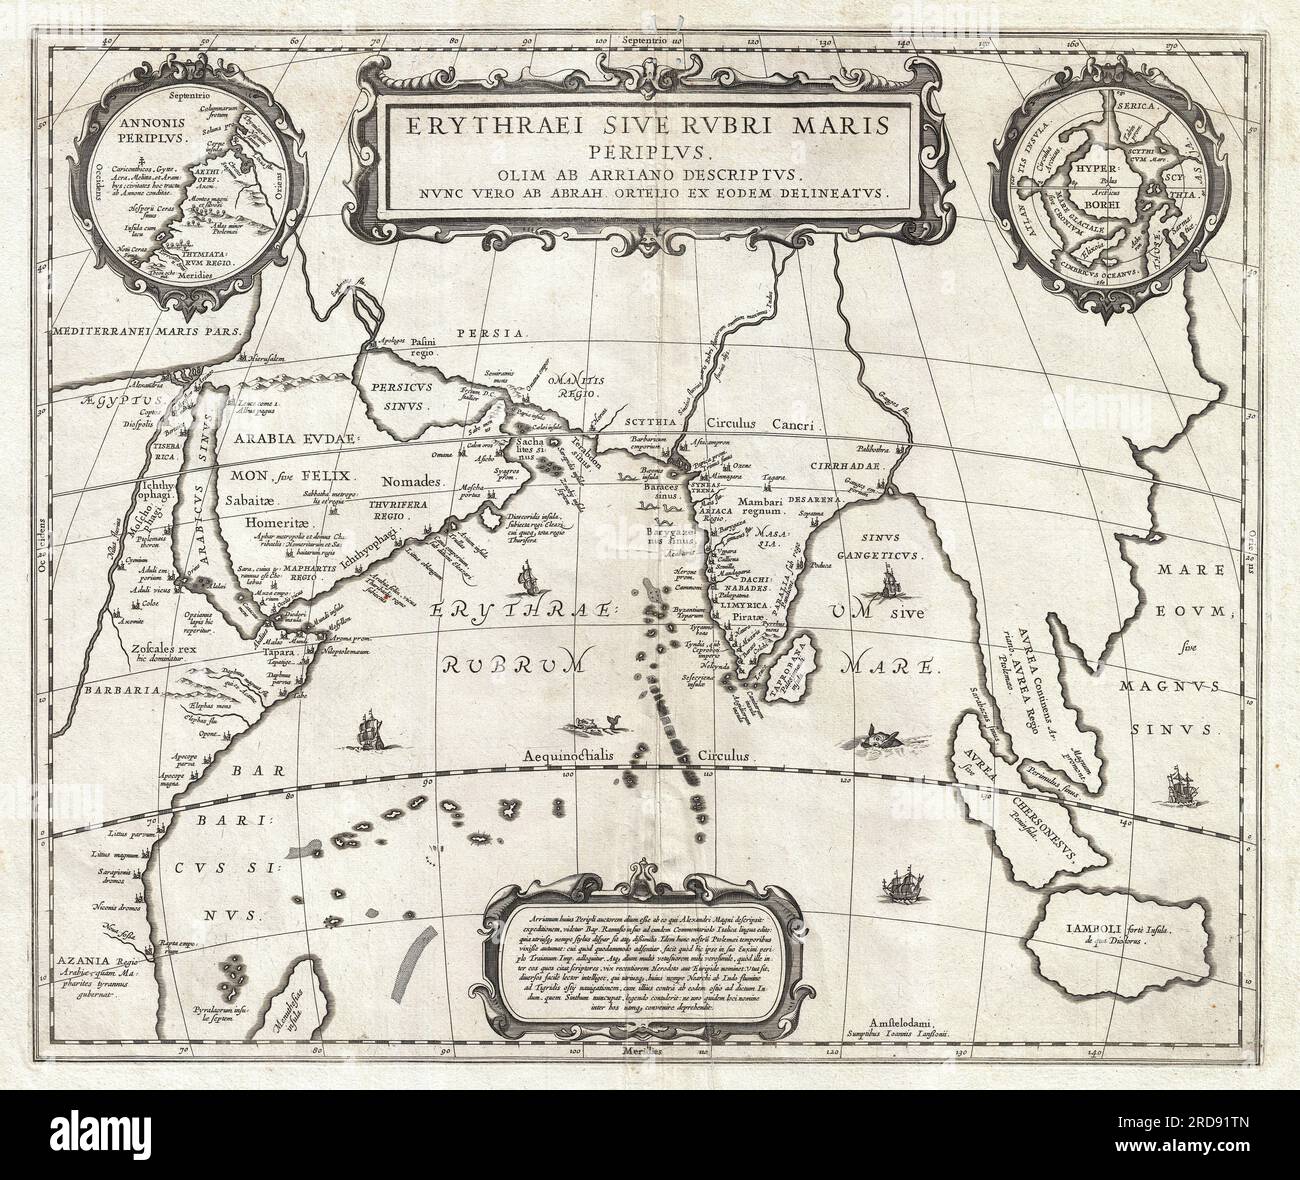 An unusual and attractive 1658 map of the Indian Ocean, or Erythraean Sea, as it was in antiquity. Composed by Jan Jansson after a similar 1597 map published by A. Ortelius in his Parergon . Covers from Egypt and the Nile valley eastward past Arabia and India, to Southeast Asia and Java. Cartographically, India, Arabia, and Africa roughly correspond to the conventions of the period. Southeast Asia is less recognizable, but the Malay Peninsula, Sumatra, and Java are clearly noted. Most of the place names used throughout are derived from Ptolemy, who himself based his description of the region h Stock Photo